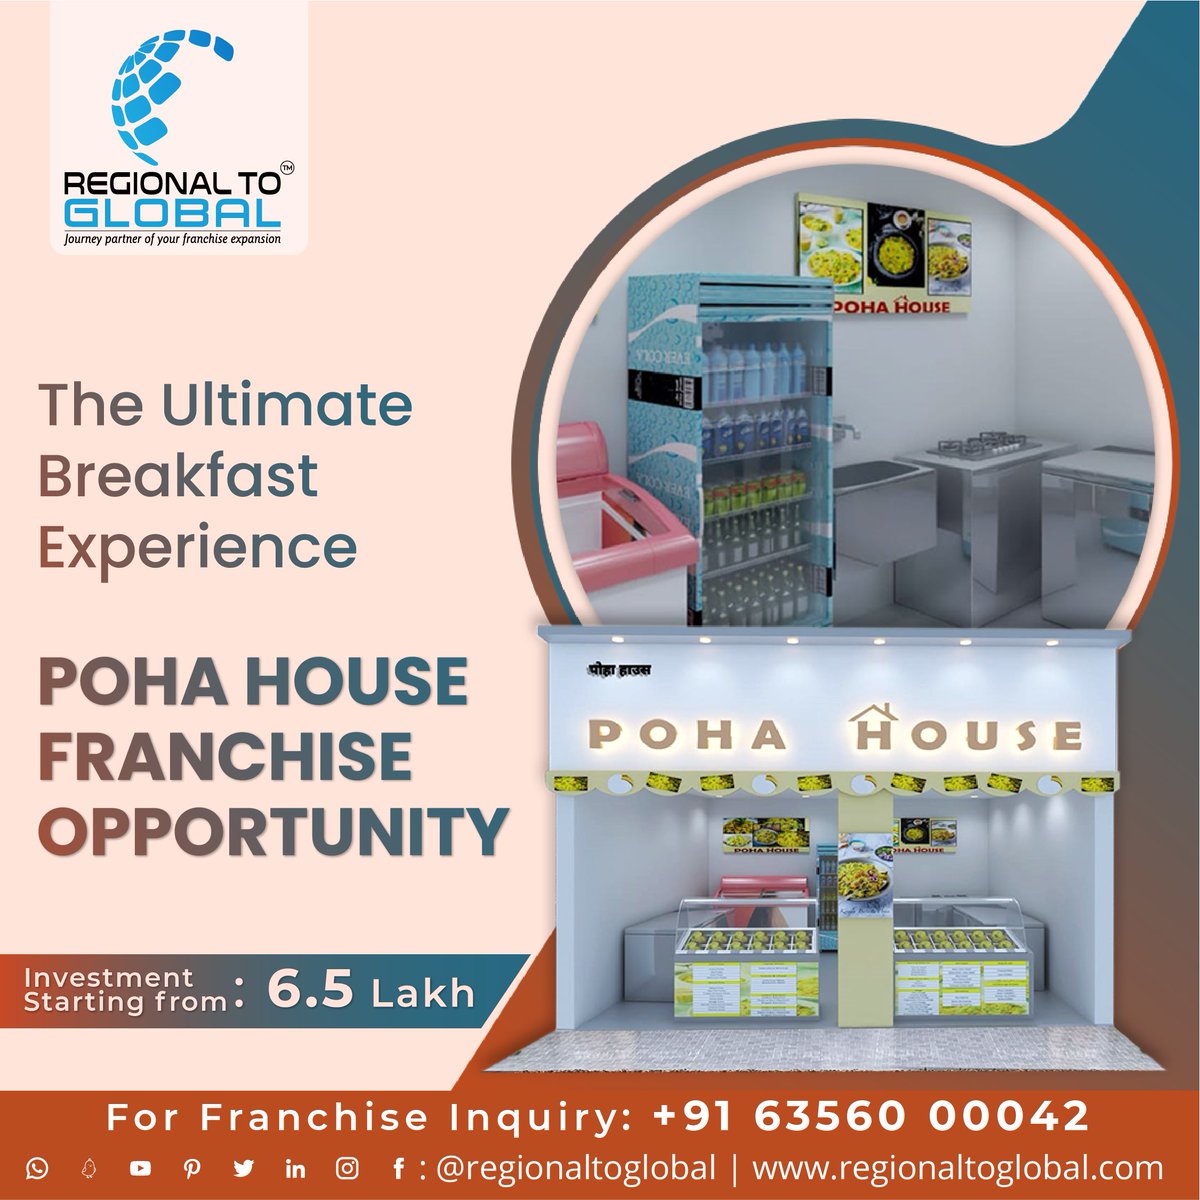 The Ultimate Breakfast Experience
POHA HOUSE FRANCHISE OPPORTUNITY

#franchiseopportunities #pohahouse #JoinUsNow #lowinvestmentbusiness #breakfastdream #BuildYourFuture #startyourdayright #freshopportunity #breakfastbusiness #joinourfranchiseteam #Ultimate #greatopportunity